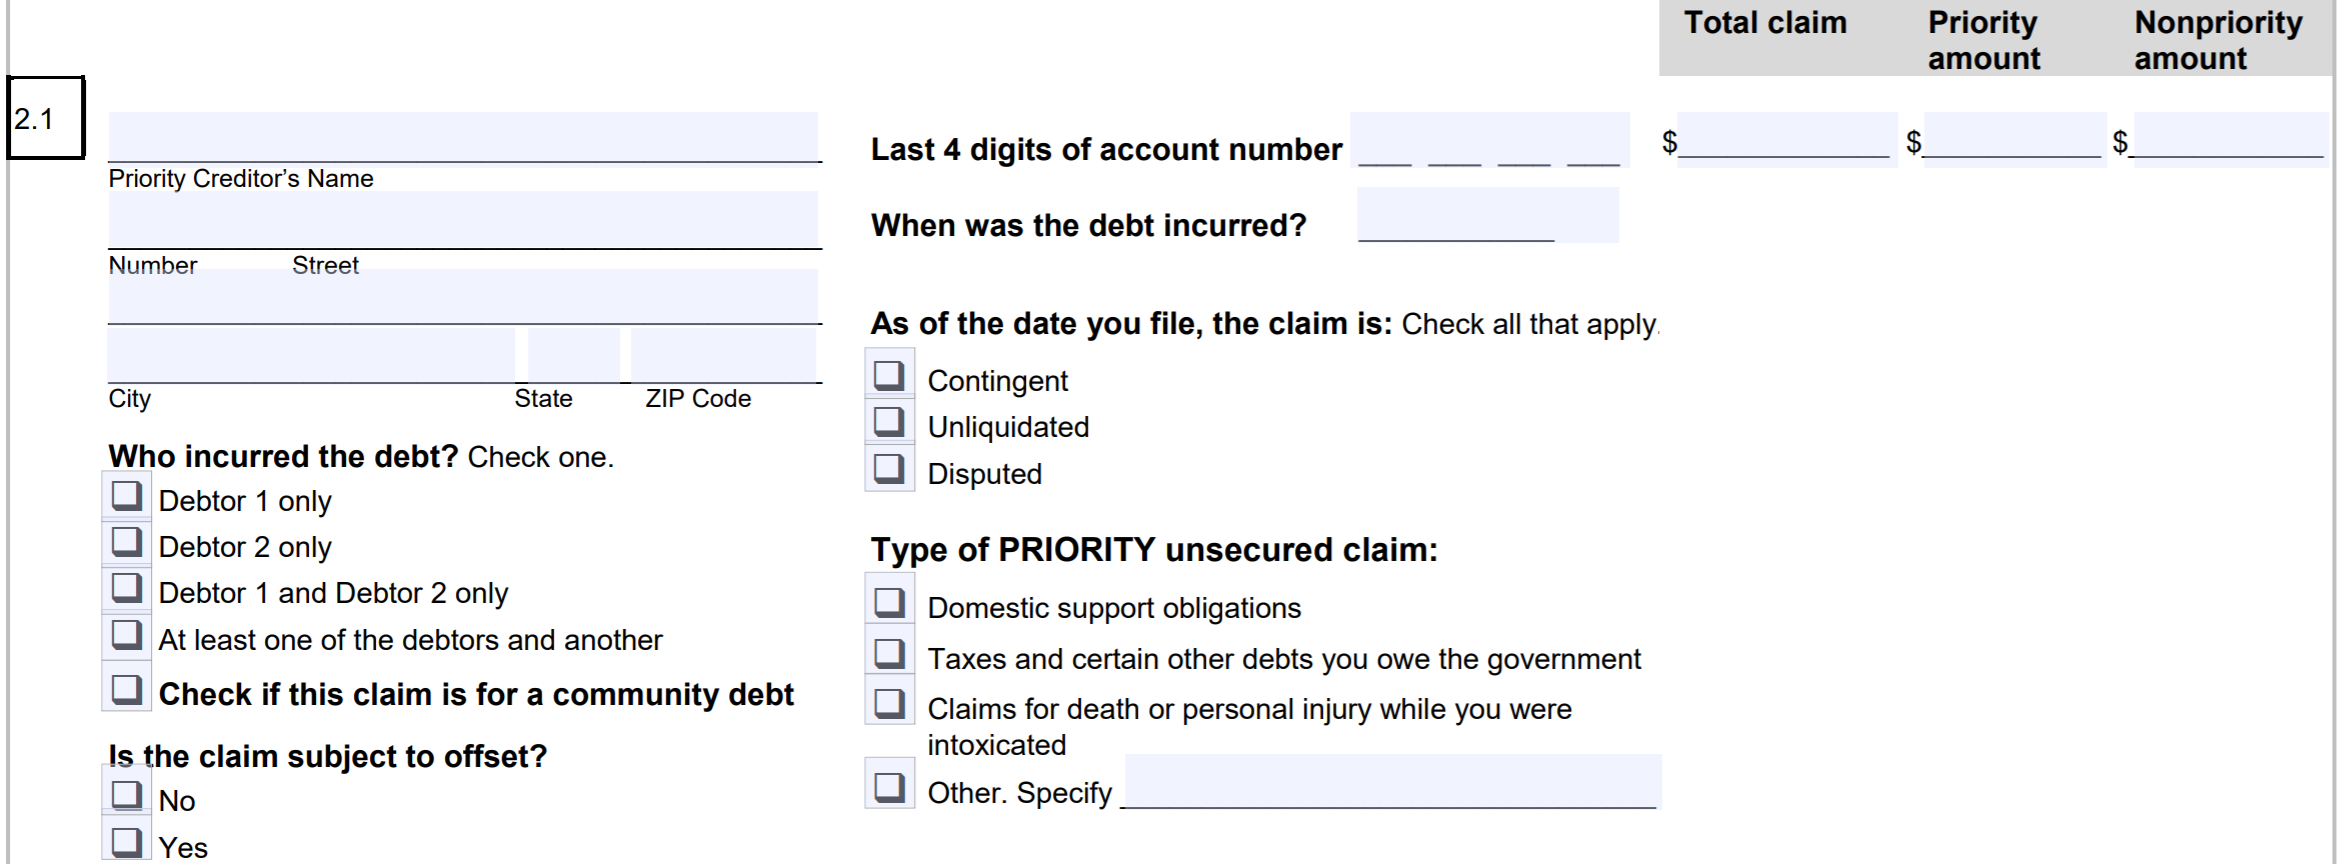 forms-106-ef-debt-priority-q2.png